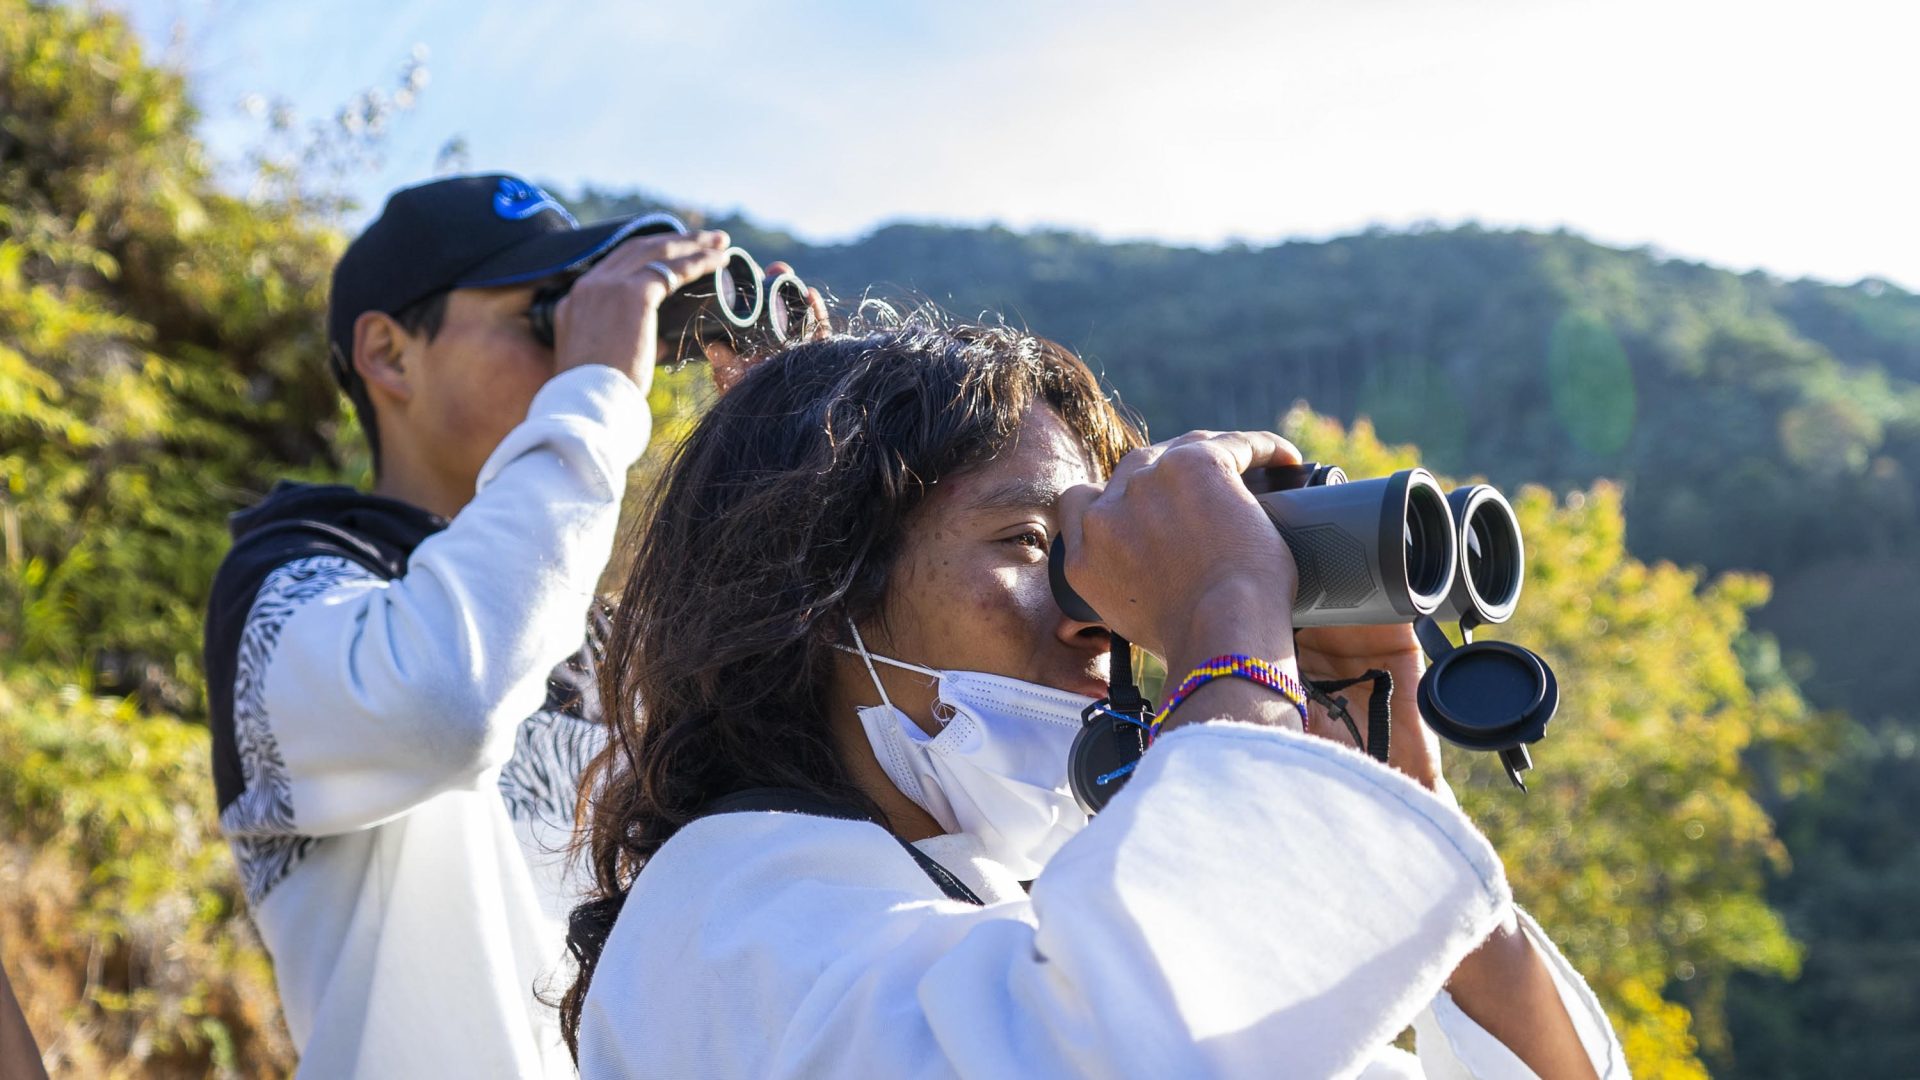 Trails, folk tales and the “Holy Grail” of birdwatching in Colombia